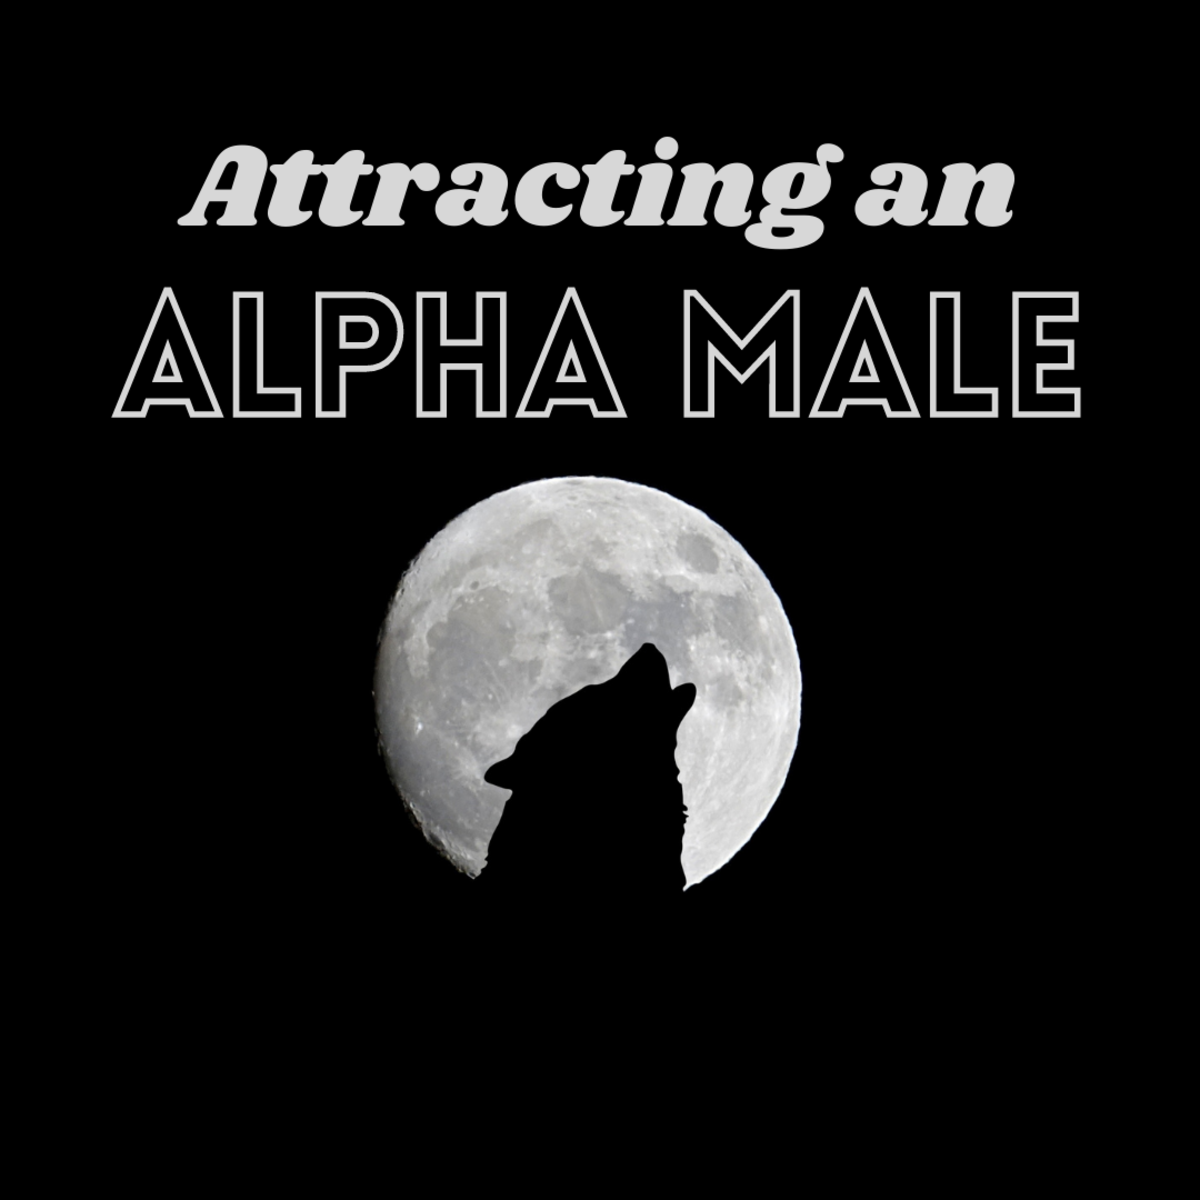 How to Attract an Alpha Male